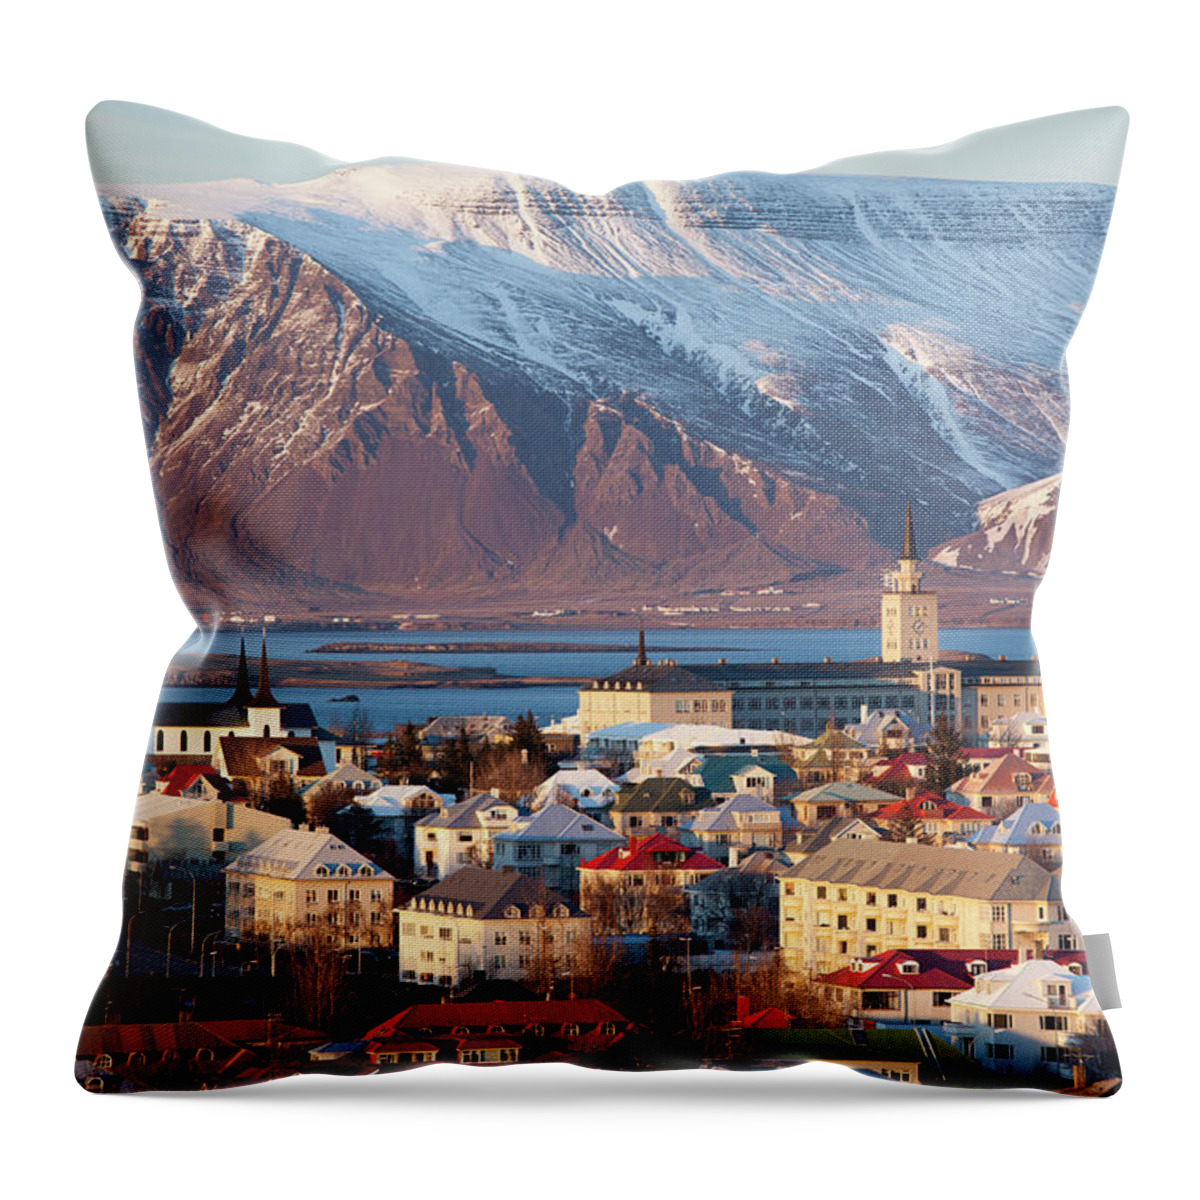 Snow Throw Pillow featuring the photograph Elevated View Over Reykjavik, Iceland by Travelpix Ltd